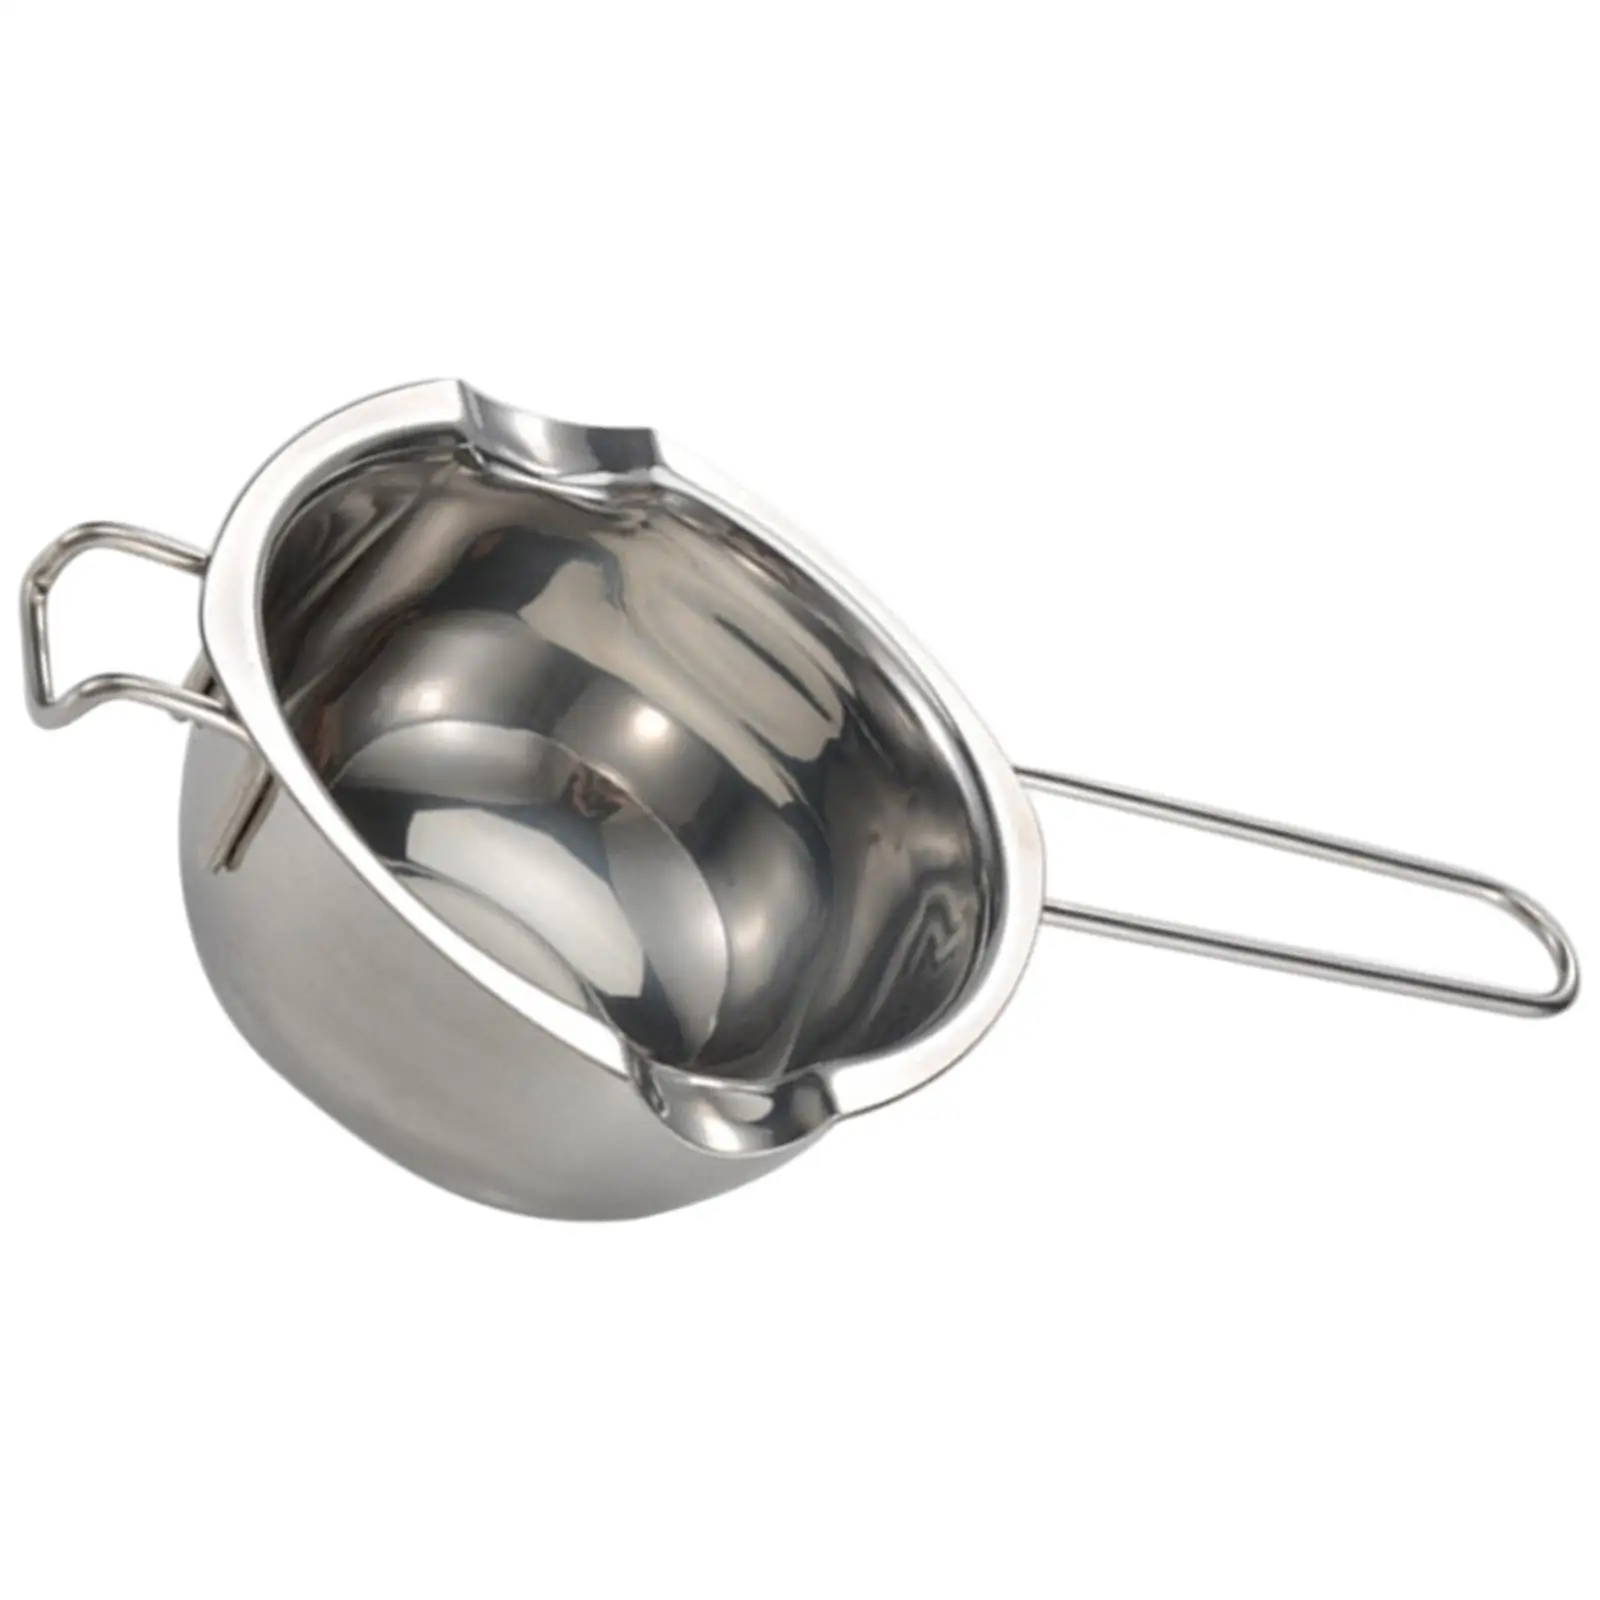 Stainless Steel Double Boiler Metls Pot 600ml for Melting Butter,Candle 20oz Capacity